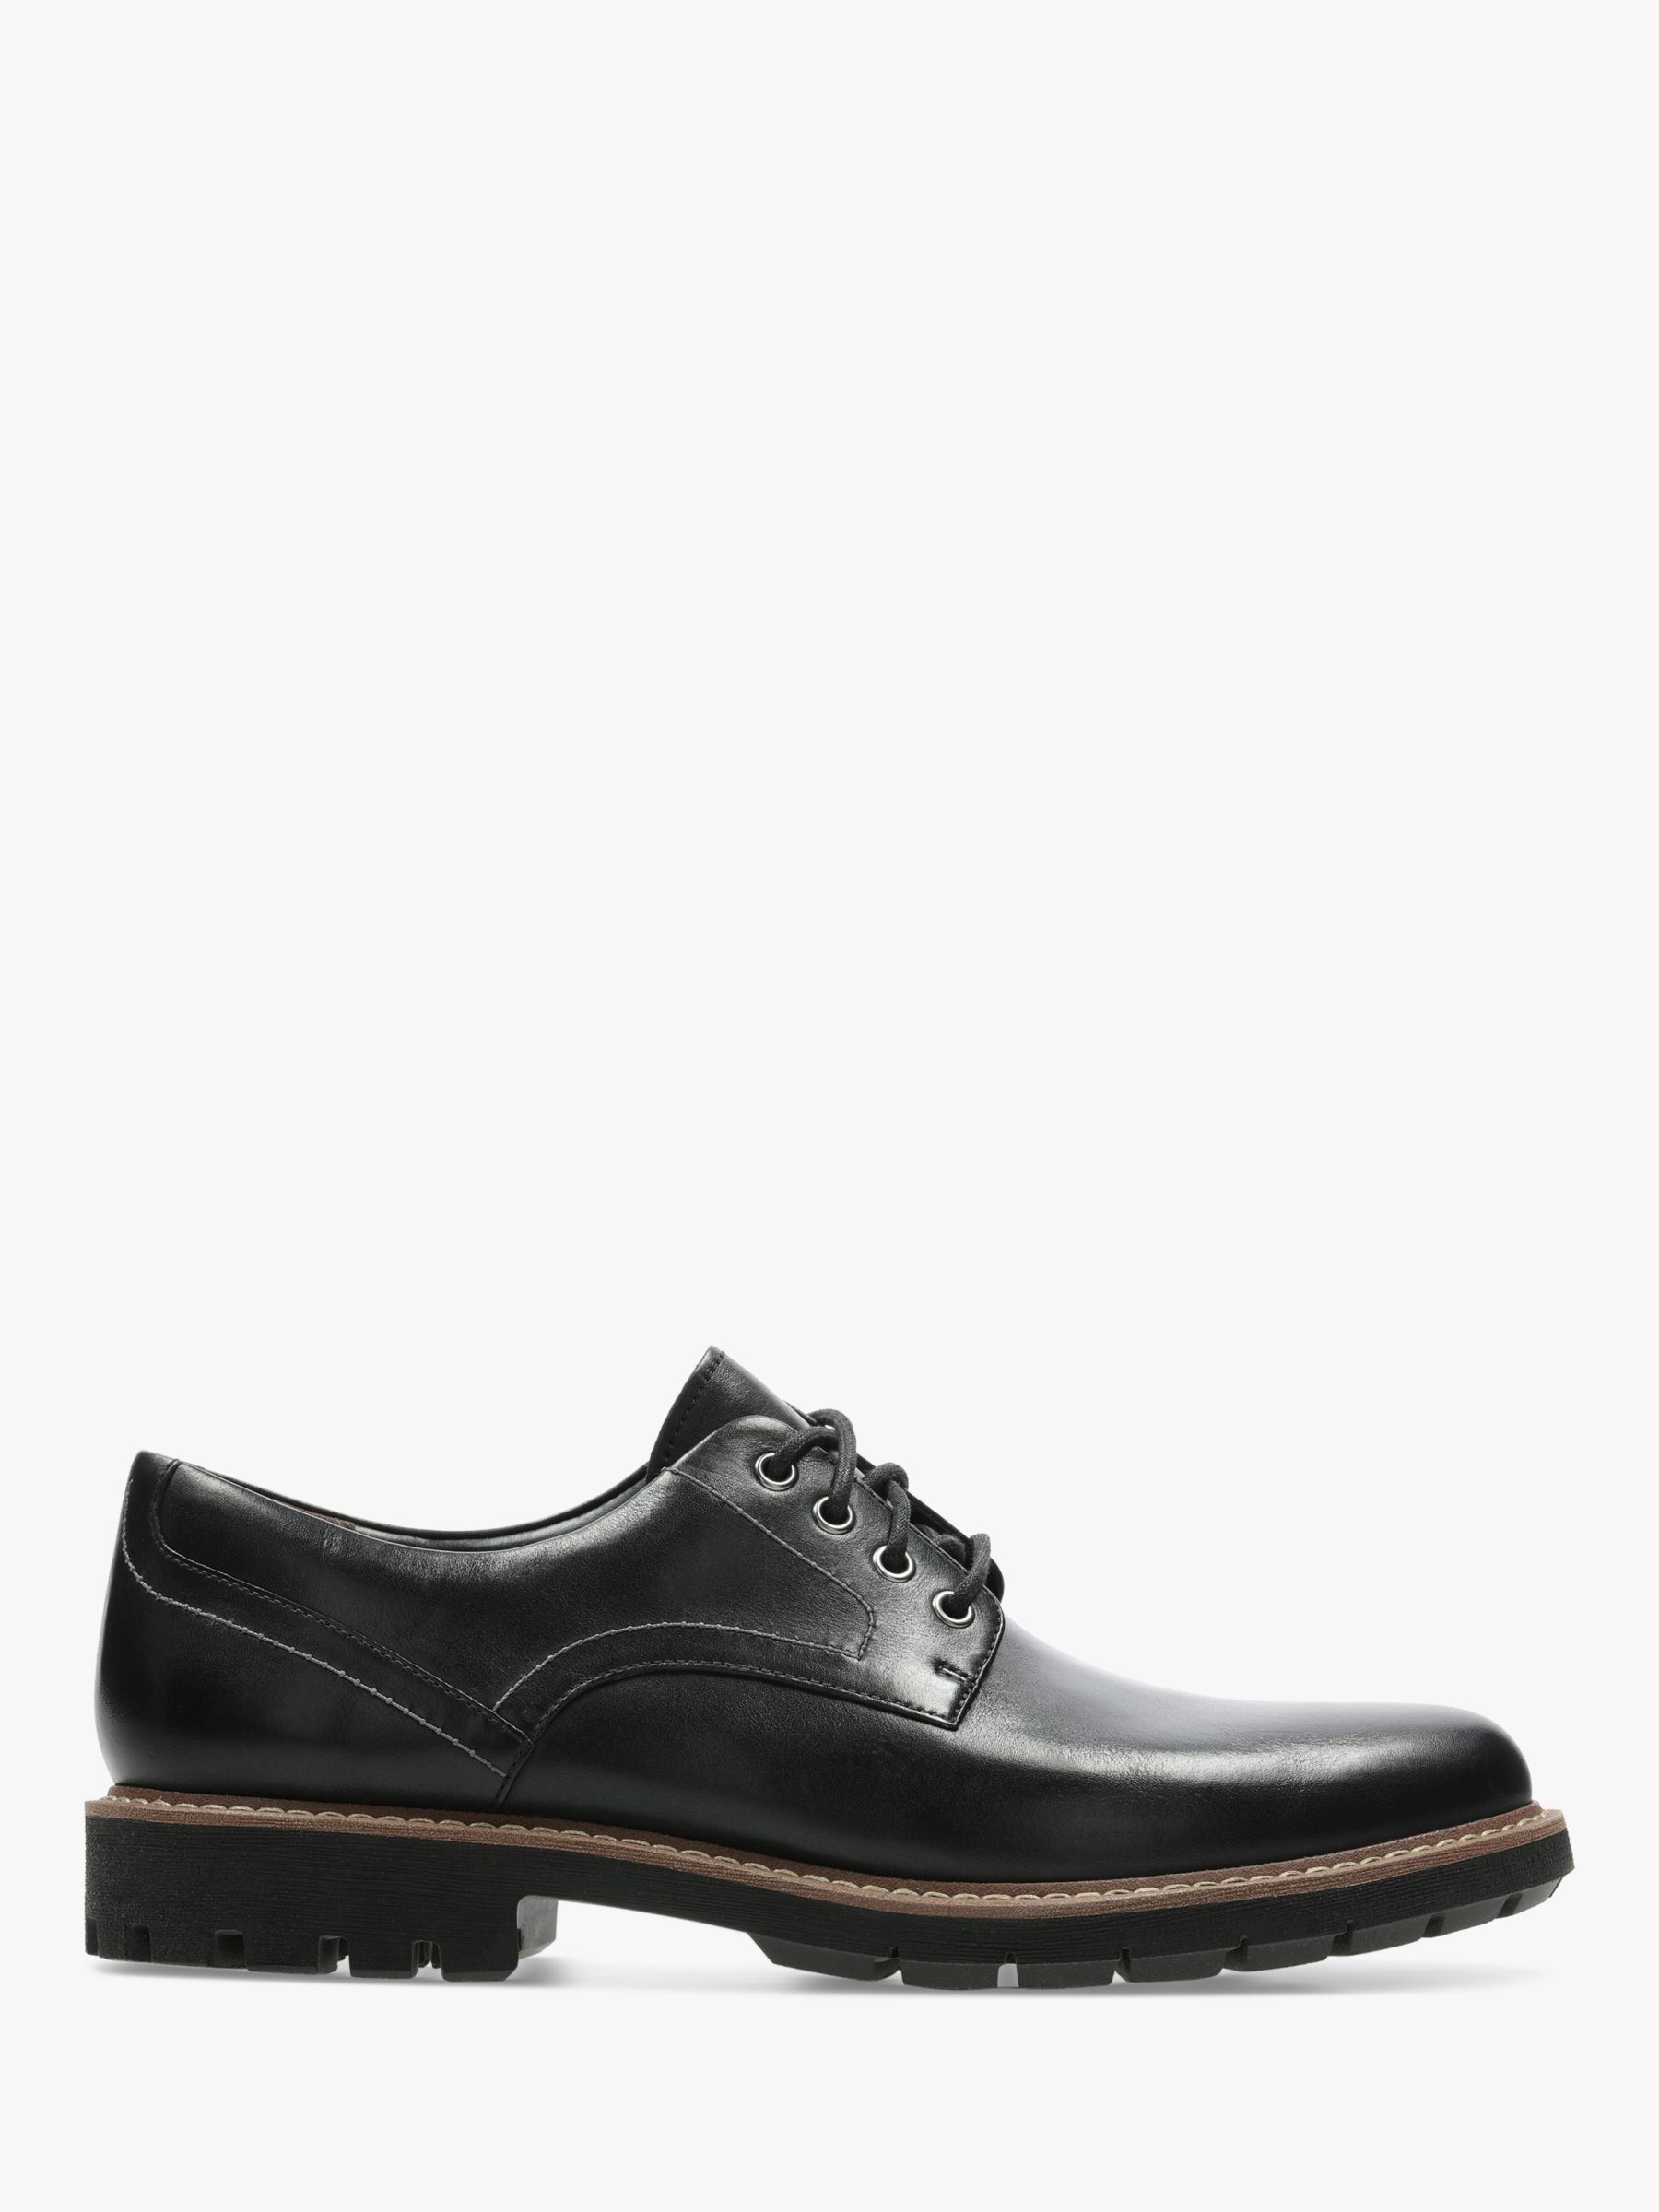 Clarks Batcombe Hall Derby Shoes, Black at John Lewis & Partners